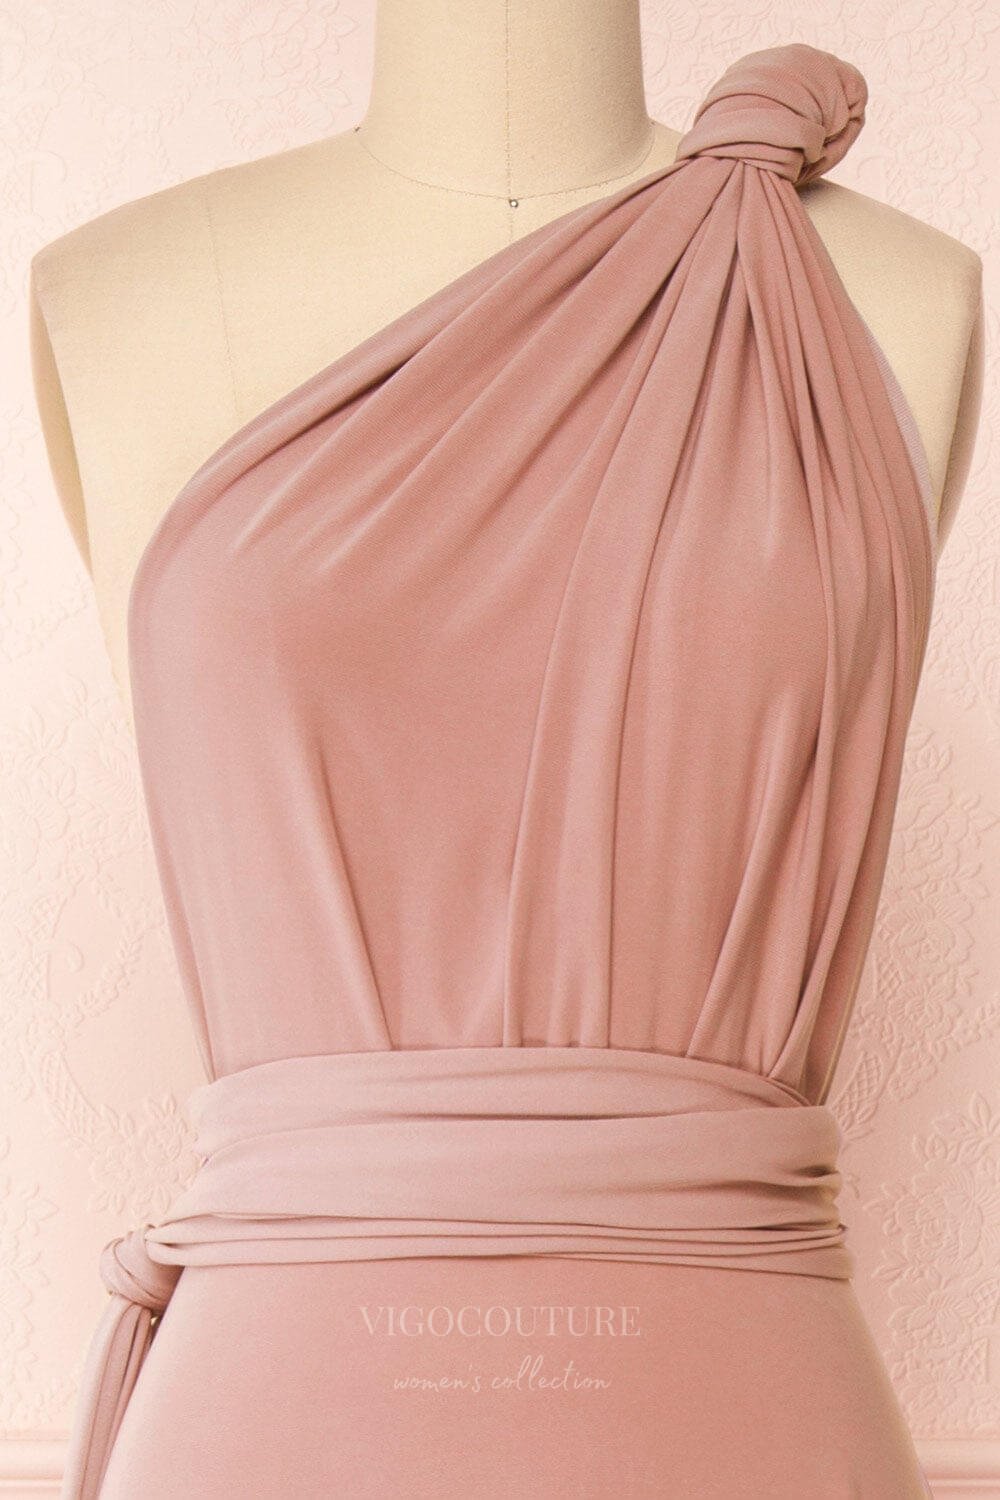 vigocouture-Convertible Bridesmaid Dress Stretchable Woven Dress Pleated Prom Dress Multiway Dress 20860-Blush-Prom Dresses-vigocouture-